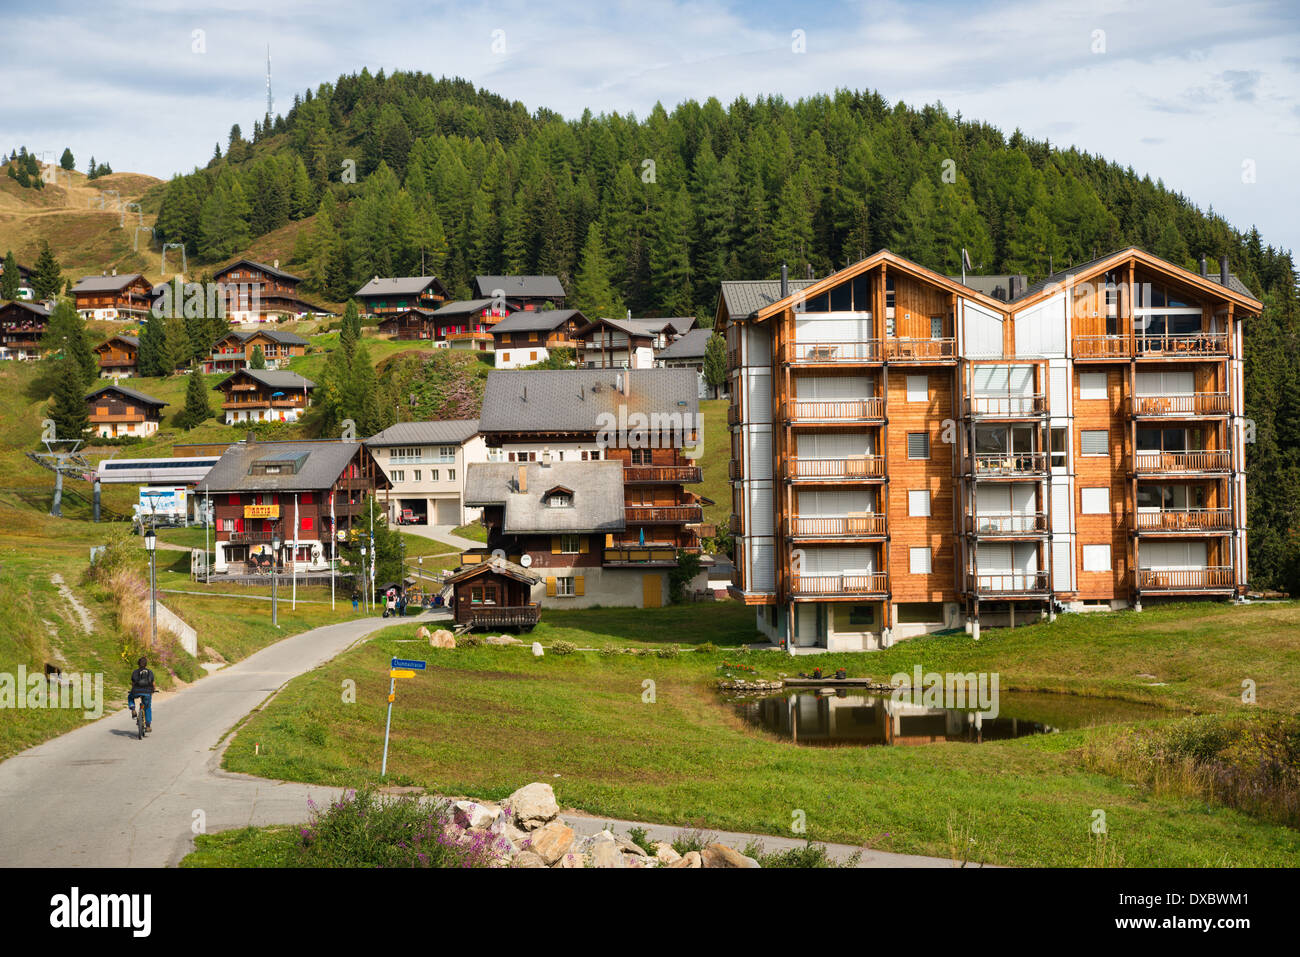 Hotels, chalets and houses of Riederalp, Valais, Swiss Alps, Switzerland, Europe Stock Photo